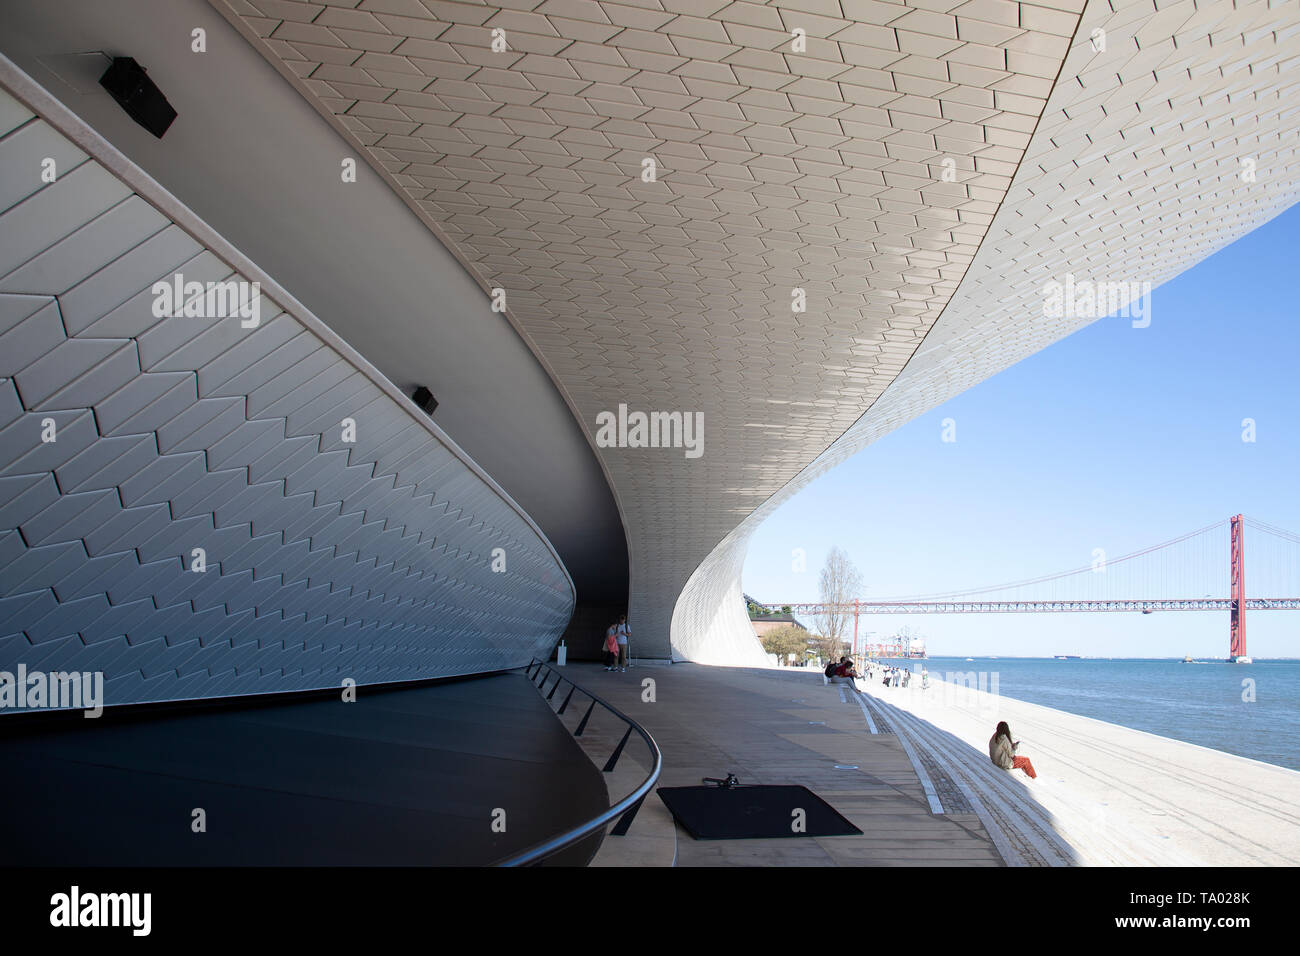 MAAT, Museum of Art, Architecture and Technology in LIsbon, Portugal Stock Photo